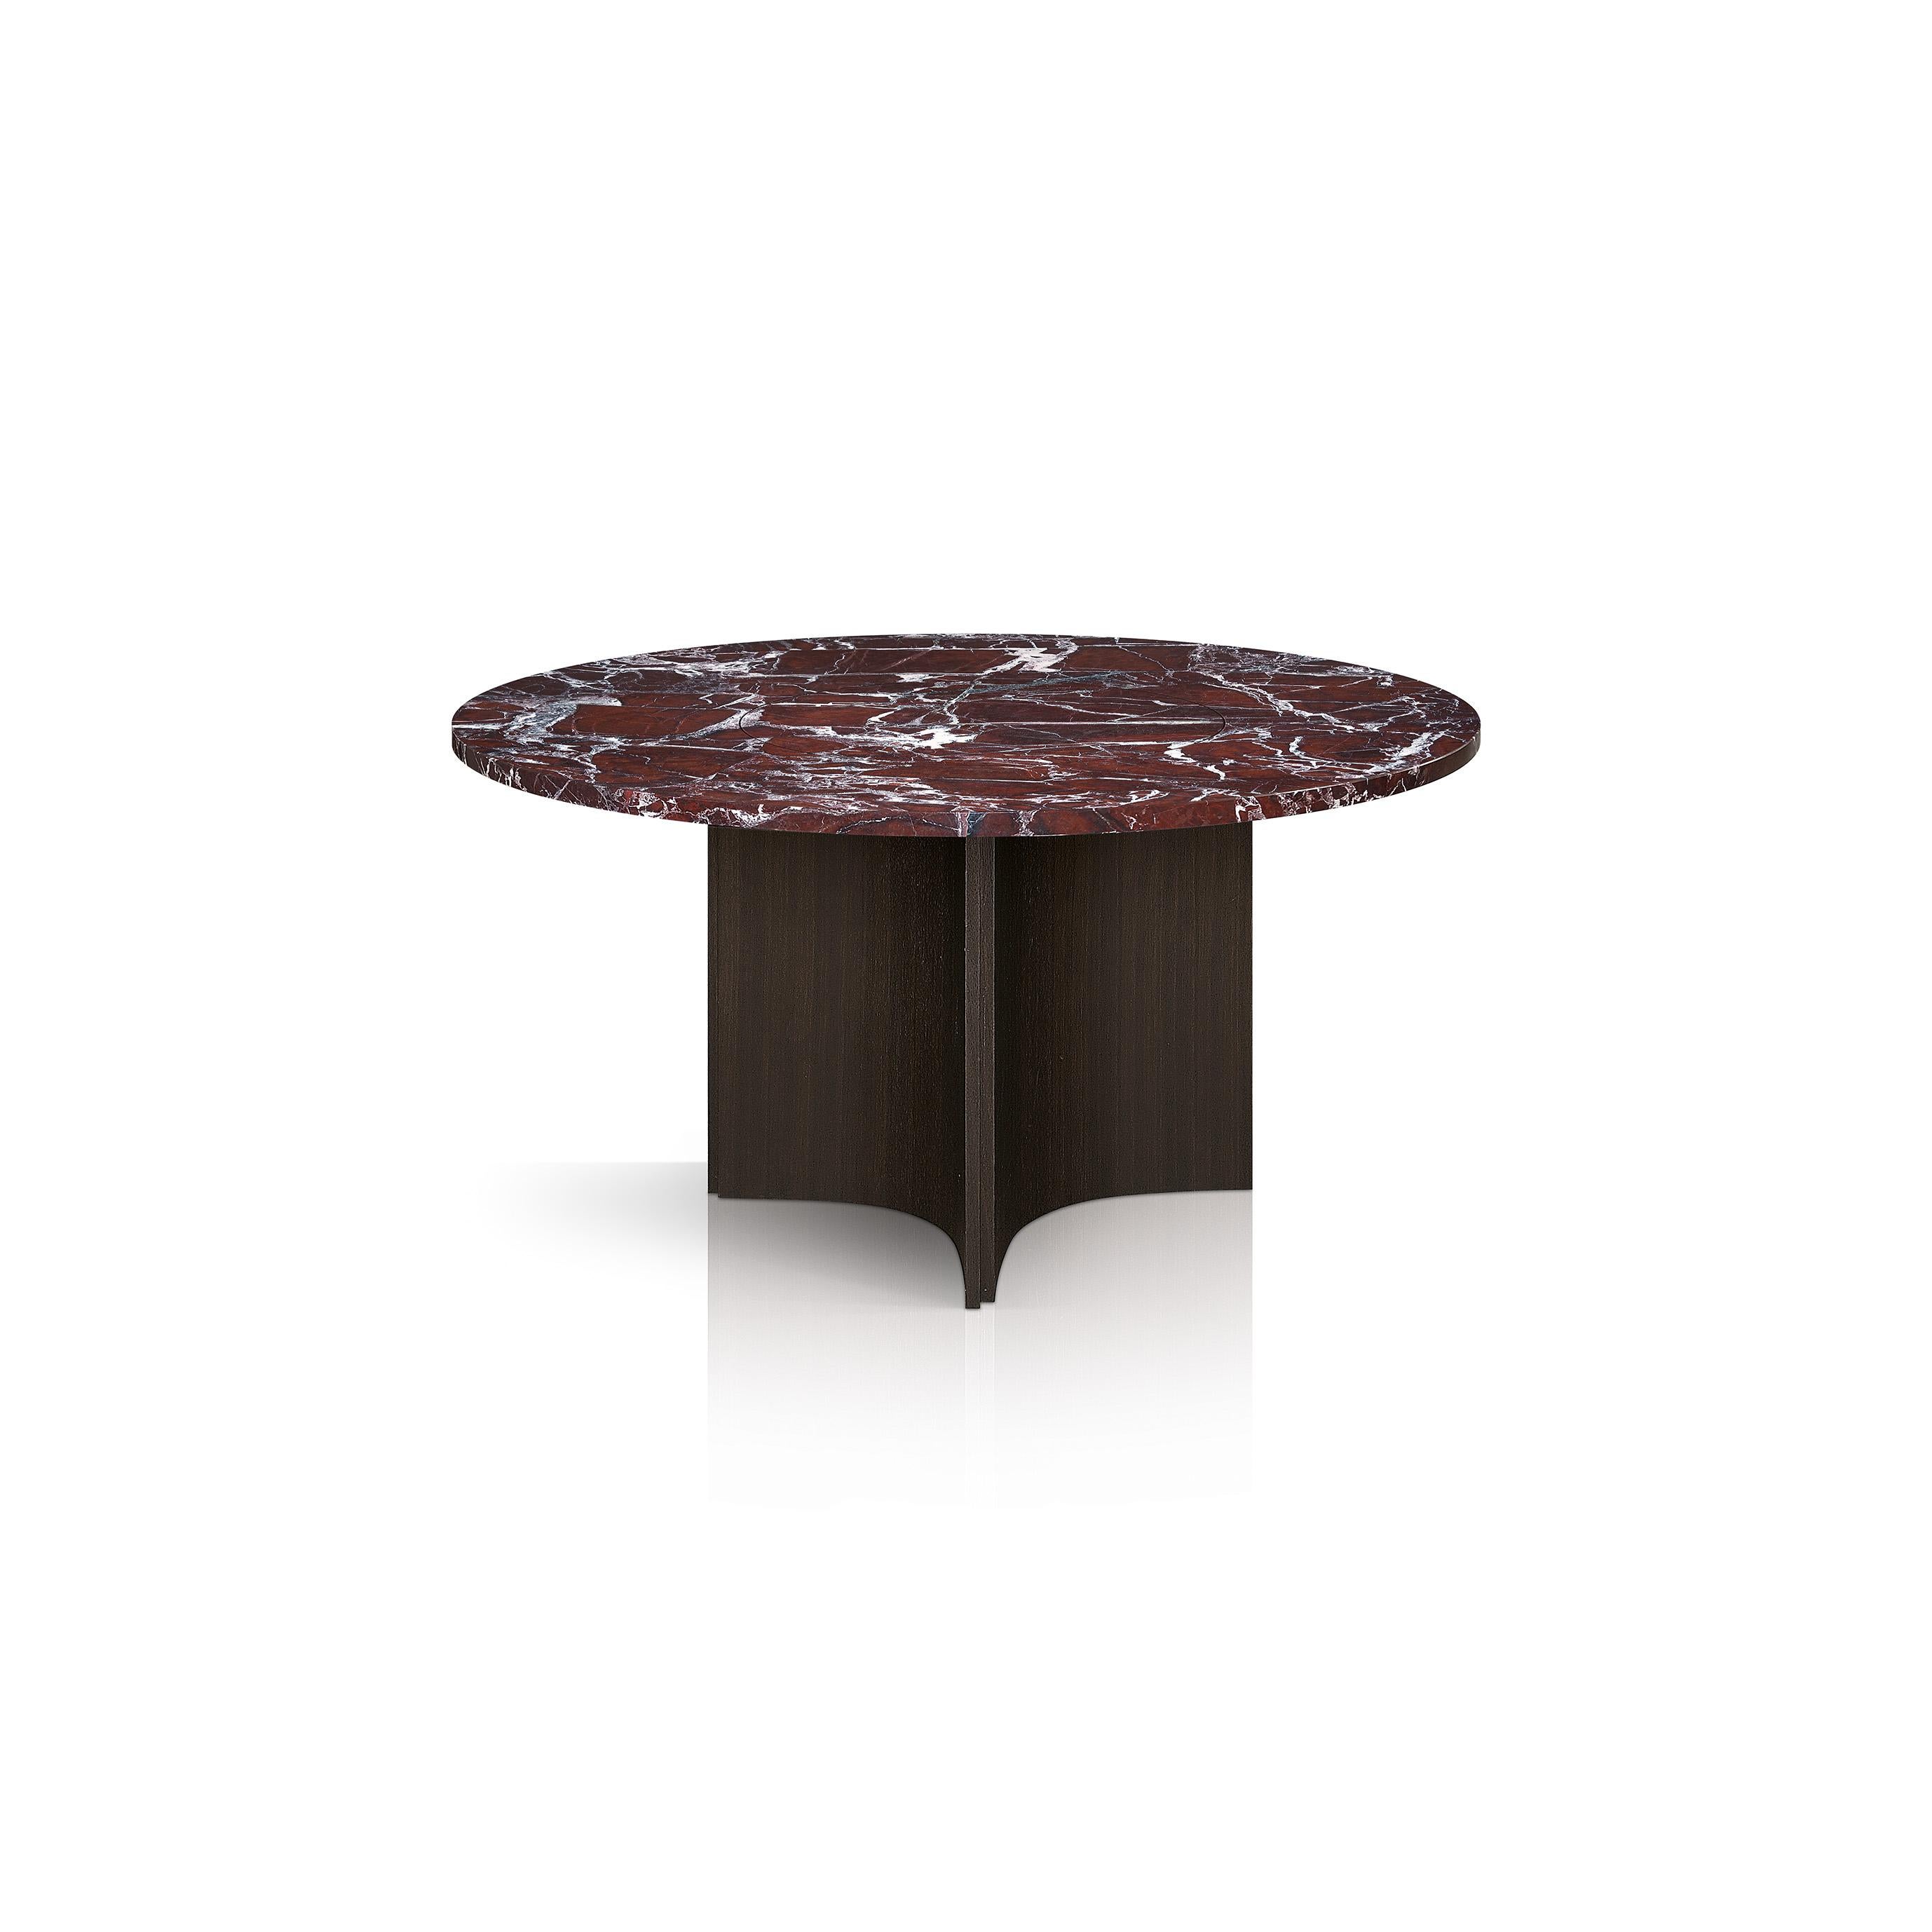 Taking center stage in a modern and contemporary dining room, this table features a striking top of wine-red Levante marble raised on a column-style base of oak-veneered steel. Part of the Fossil Collection of sculptural and dynamic tables, the